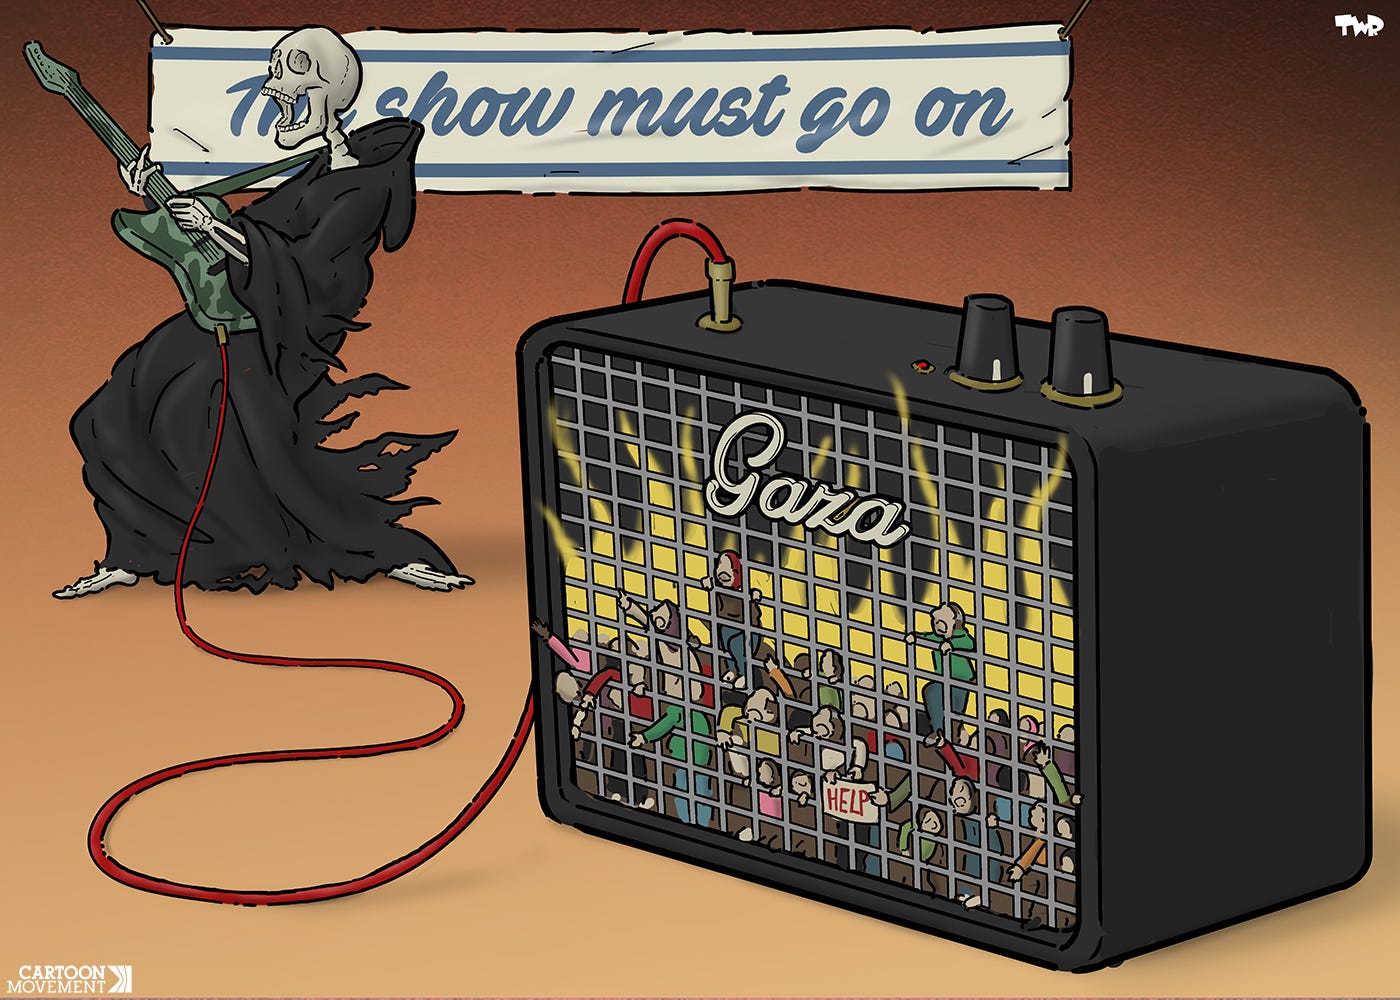 Cartoon showing the grim reaper rocking on a guitar with an army camouflage pattern. The guitar is hooked up to an amplifier labeled 'Gaza'. Behind the speaker grating of the amplifier, we see fire and the people of Gaza, who cannot get out. Behind the guitar player, there is a banner with the text 'The show must go on'.